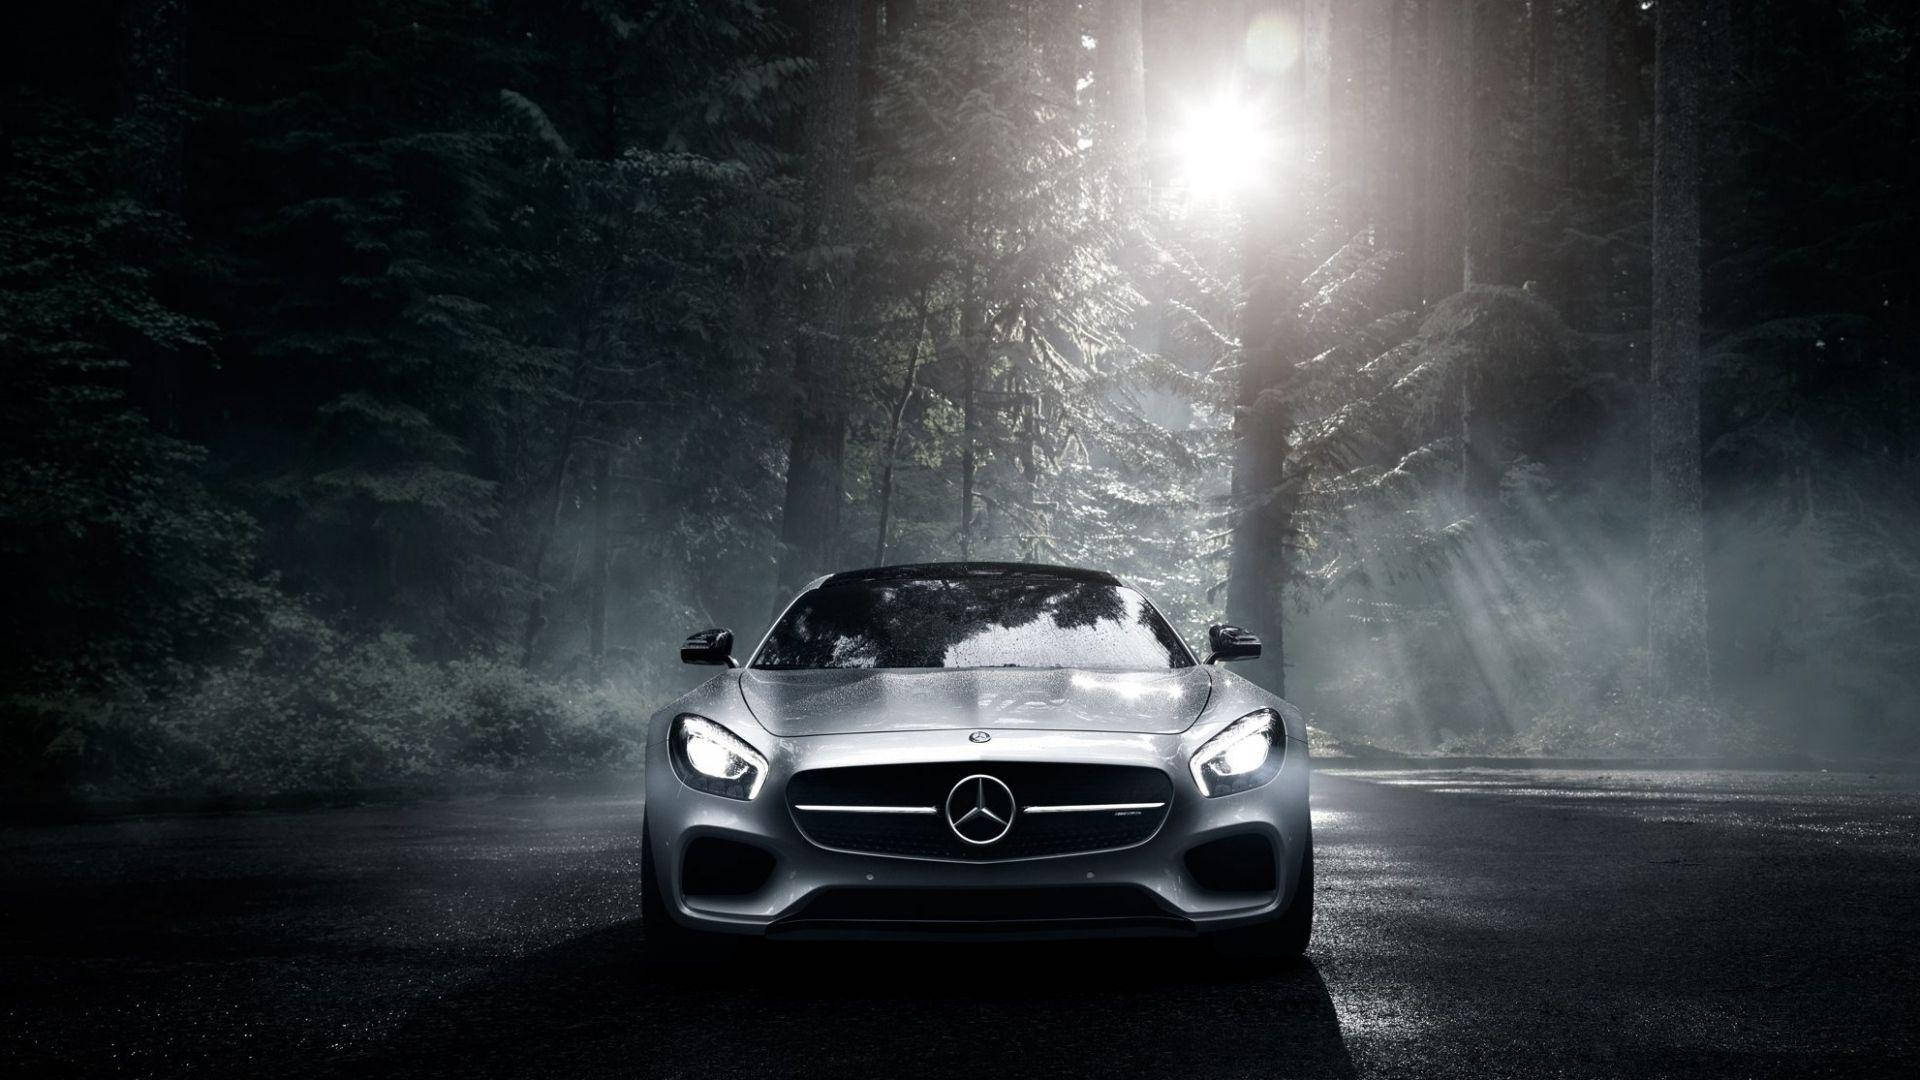 1920x1080 Full Hd Car In Forest At Night Background